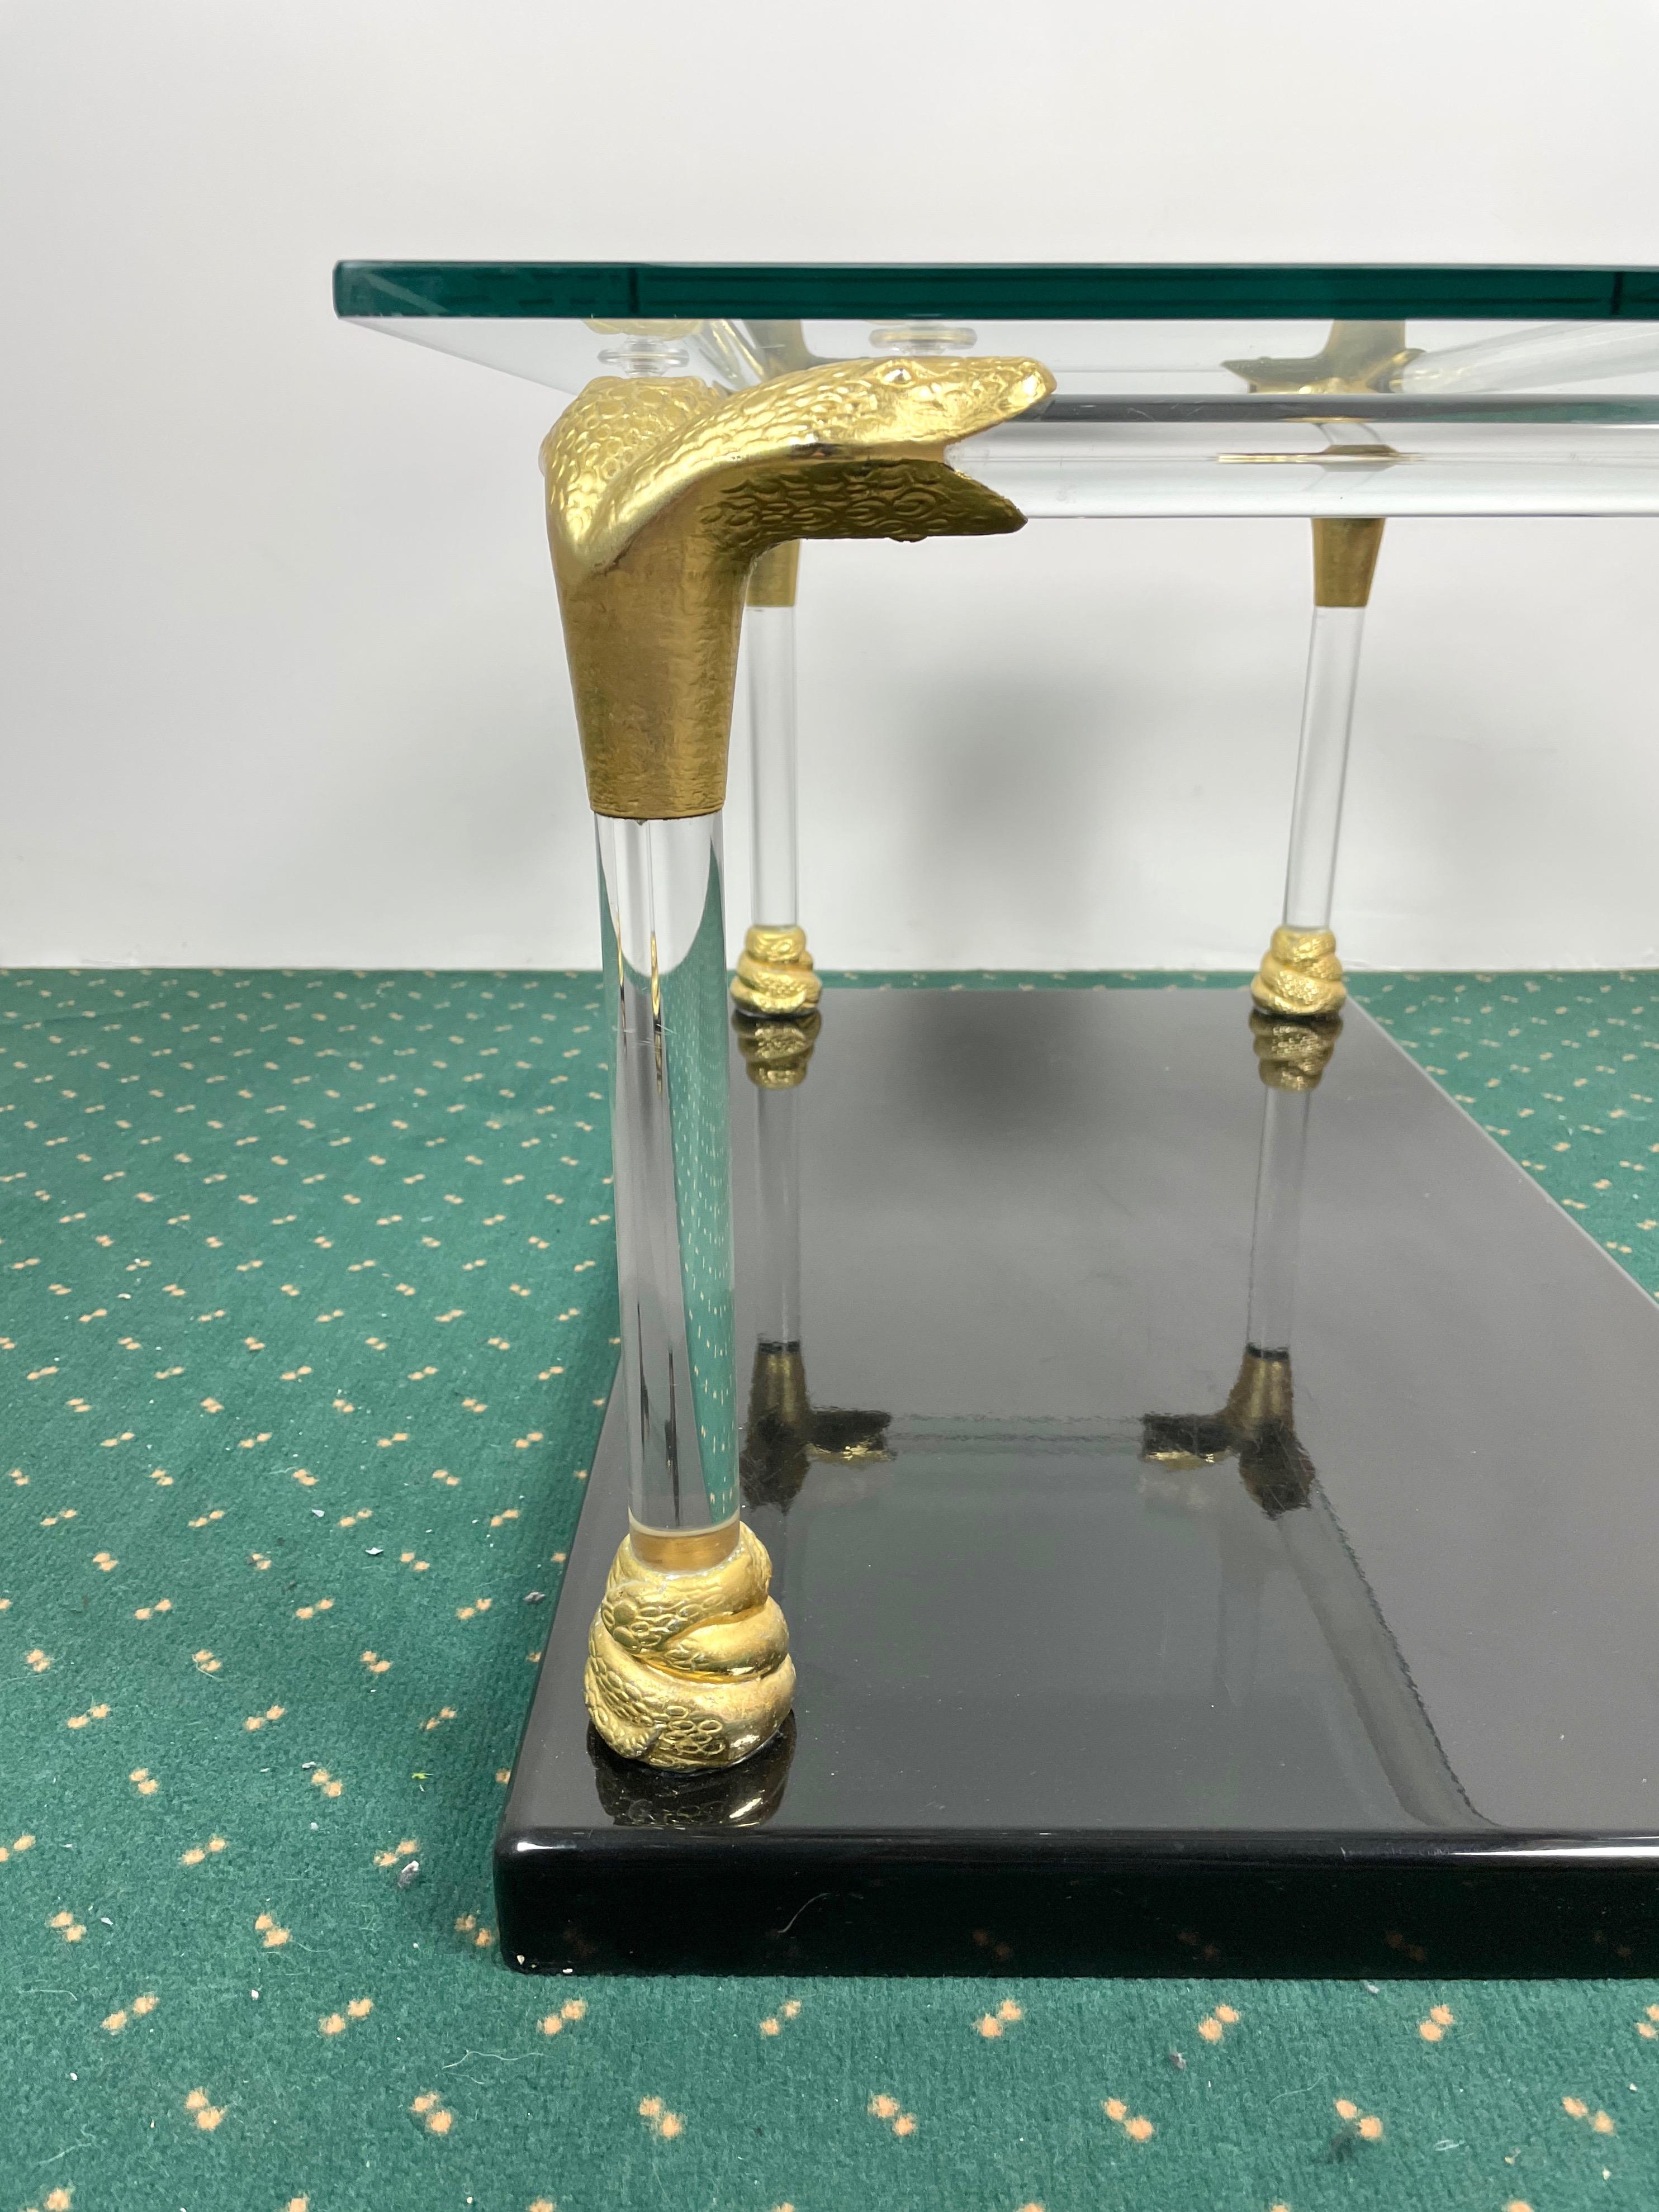 Lacquered Lucite, Wood and Brass Coffee Table with Snake Head Details, Italy, 1970s For Sale